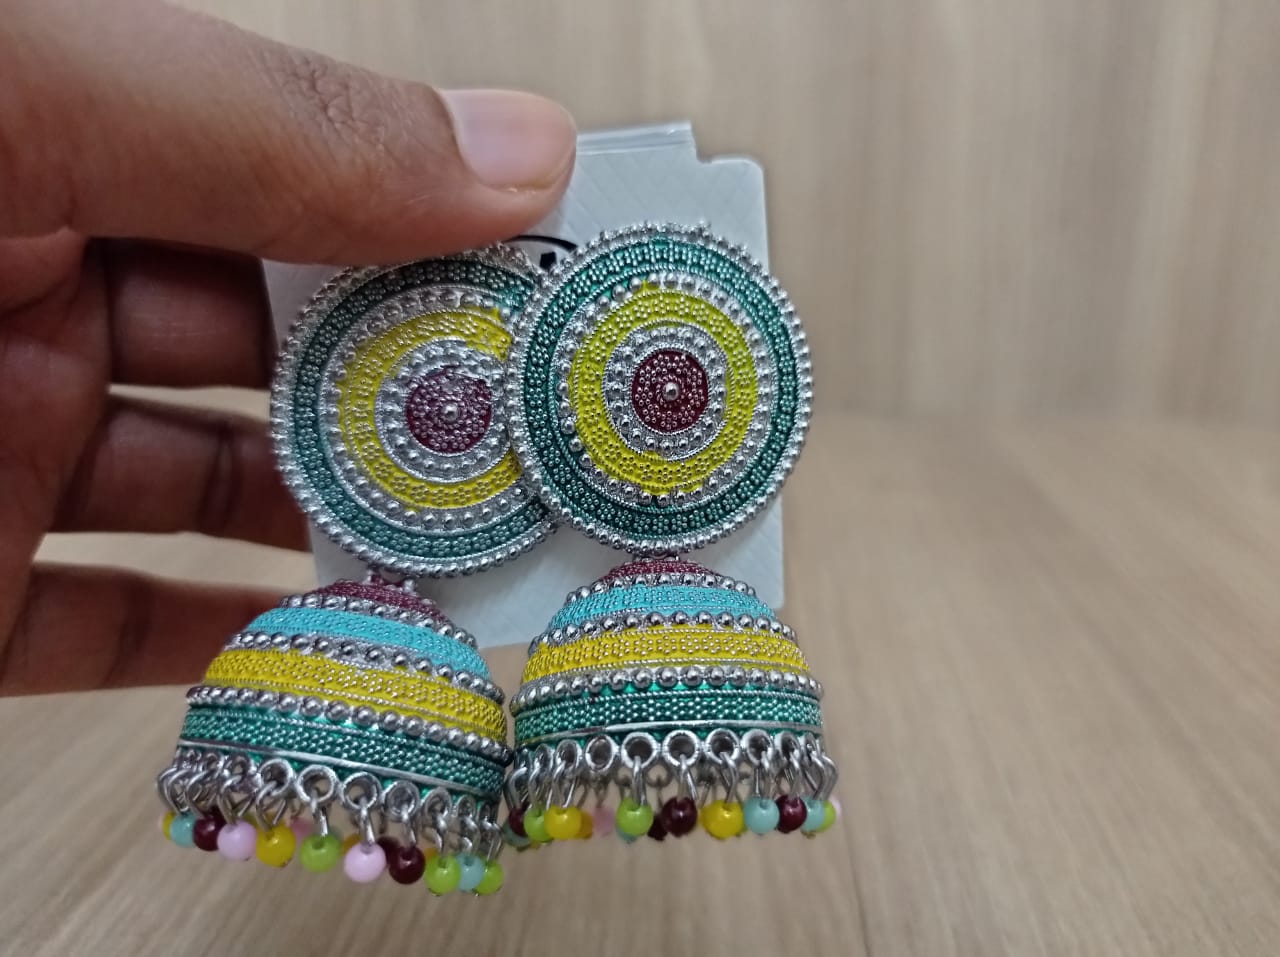 Paper Quilled Jhumka Earrings - Shades of Green : 11 Steps (with Pictures)  - Instructables